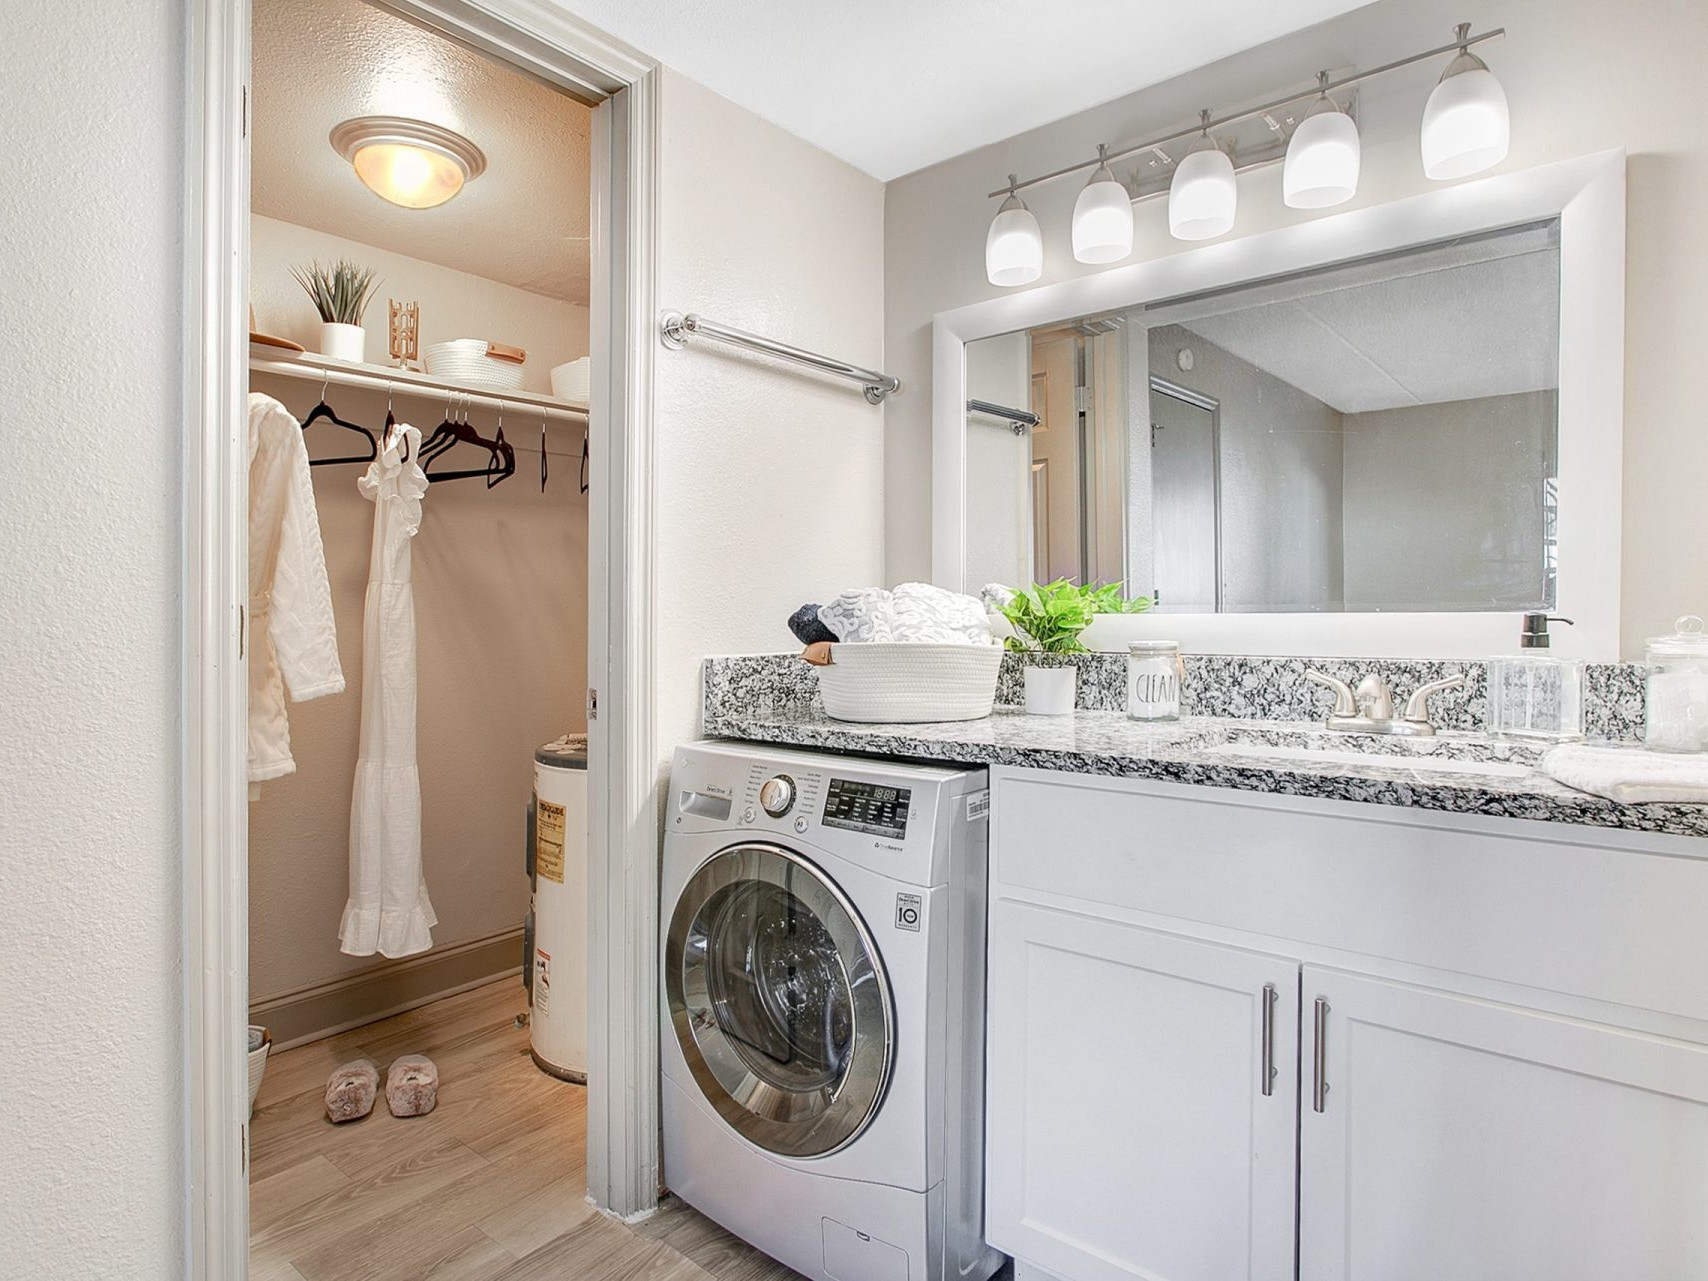 A laundry are with a modern sink, built-in cabinets, washer/dryer and access to a walk in closet.